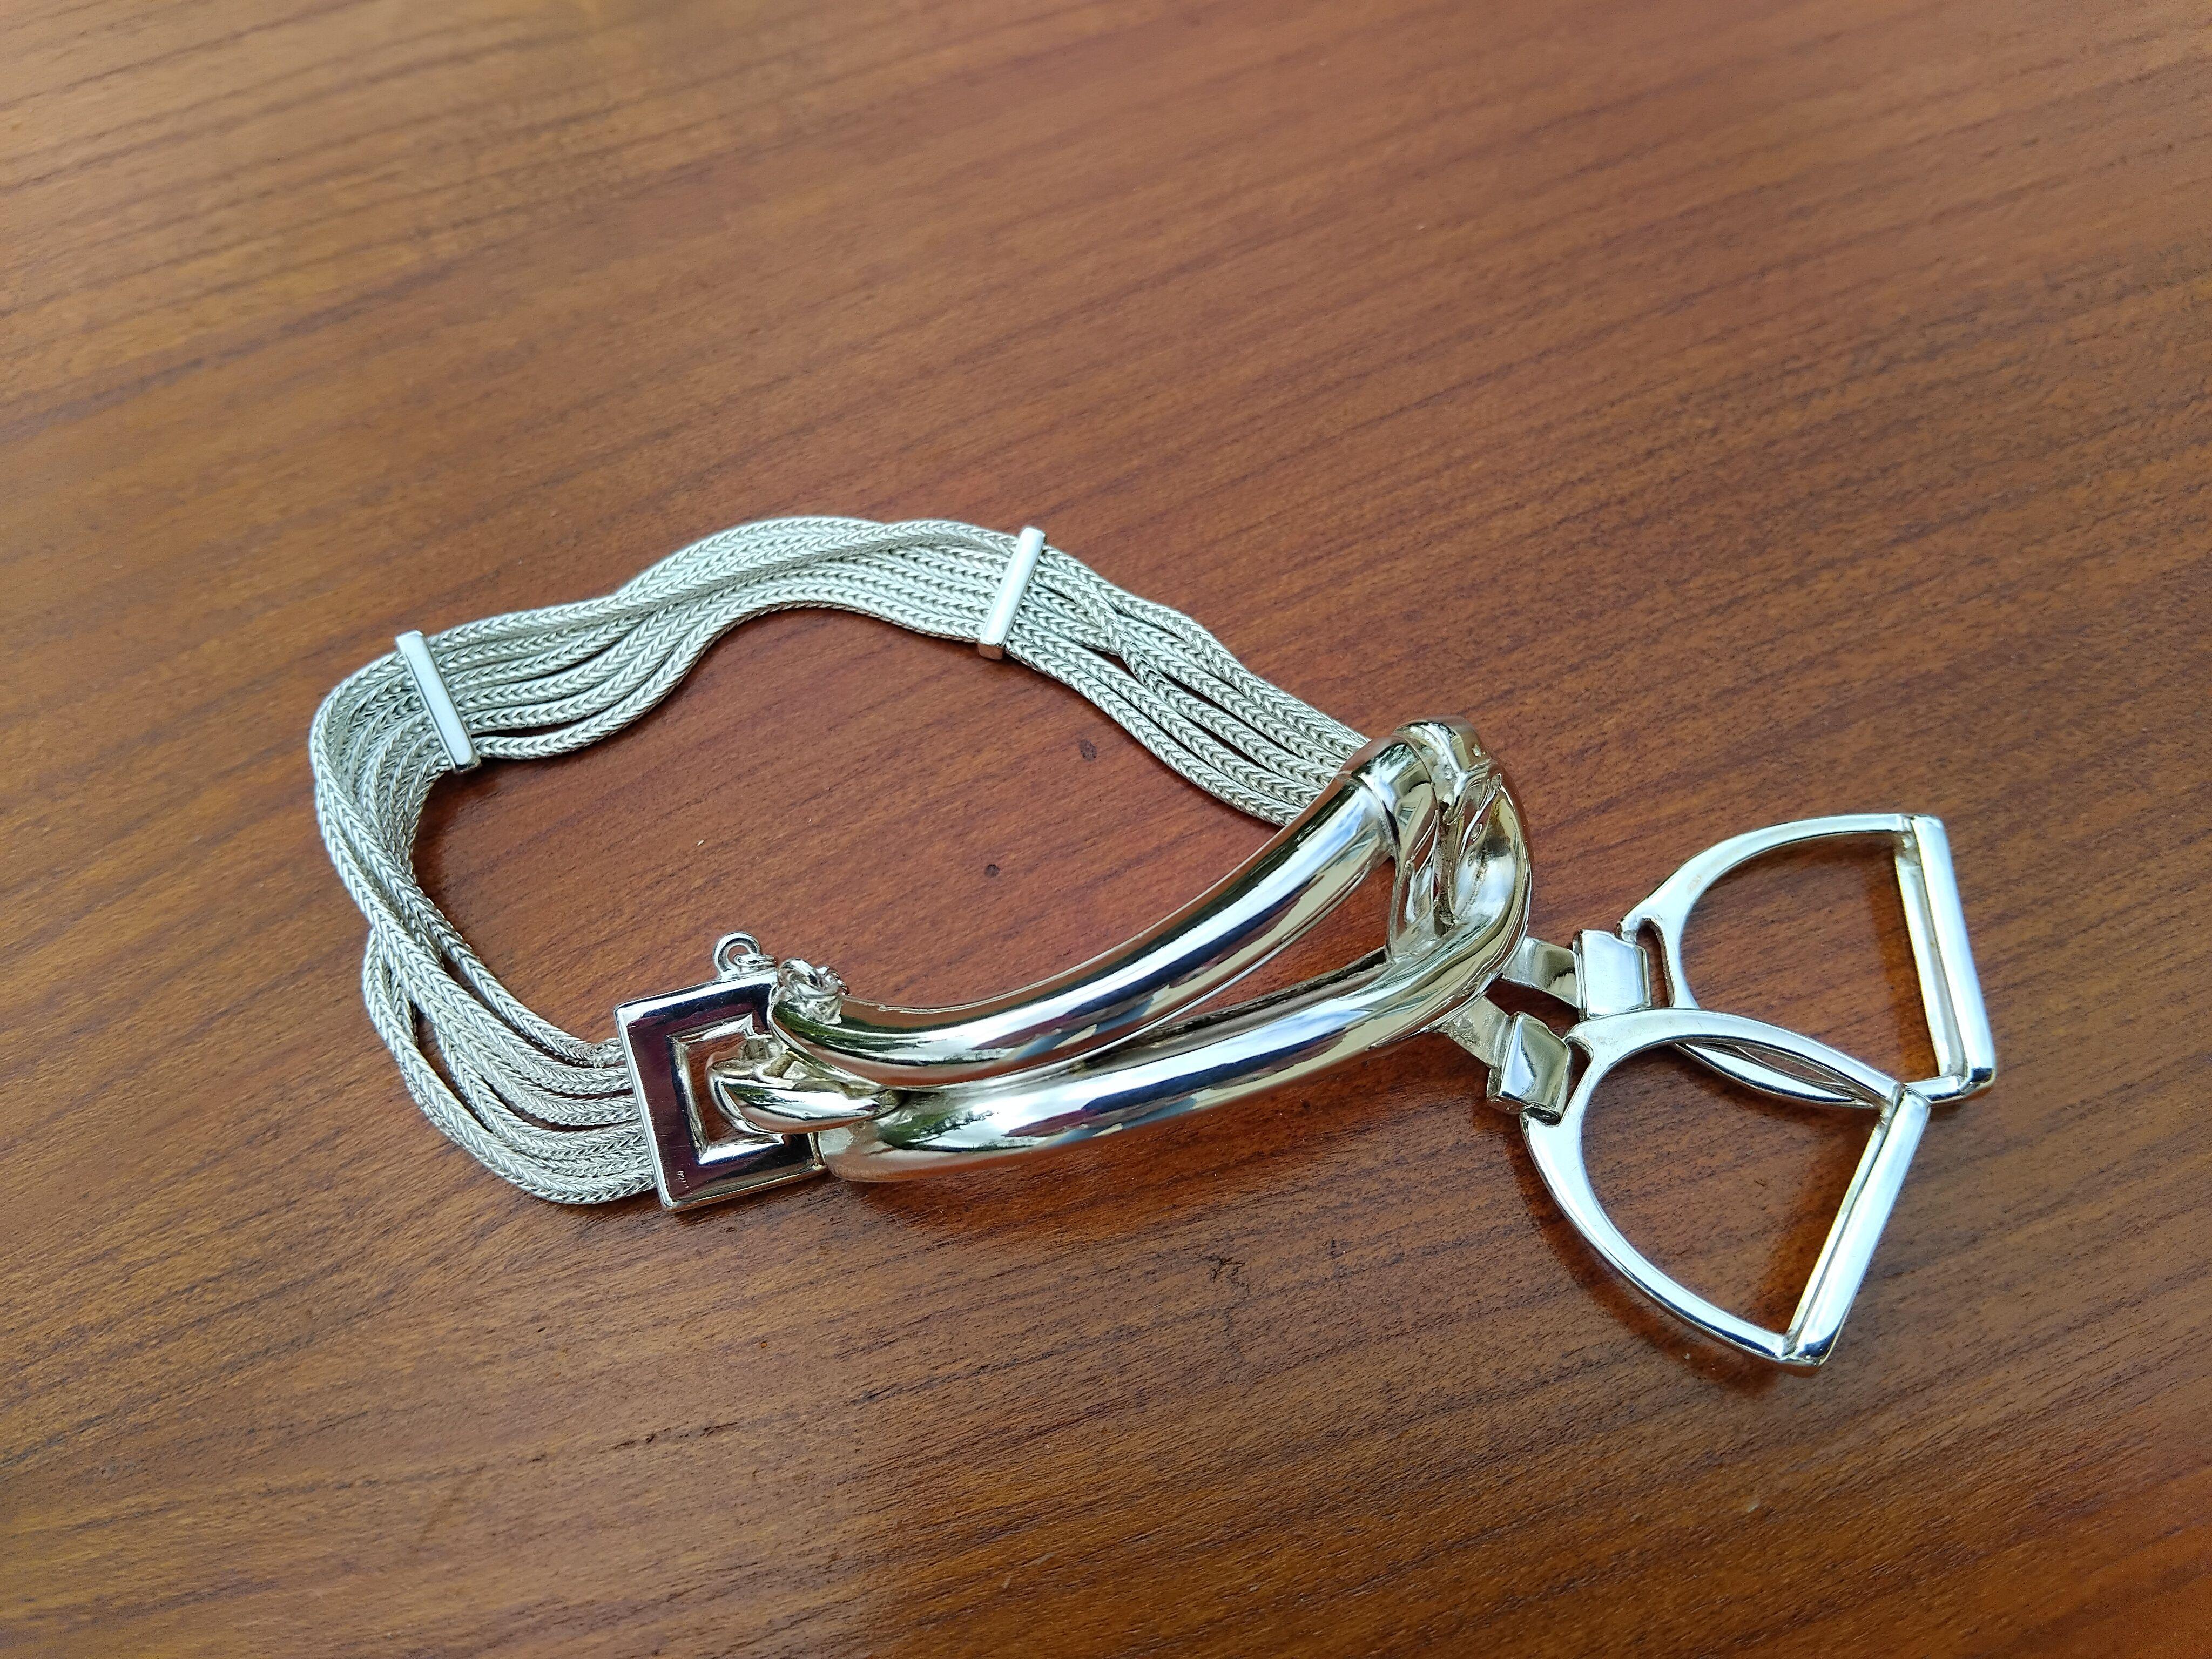 Exceptional Hermès Bracelet Equestrian Theme Stirrups Charms in Silver Texas  For Sale 4